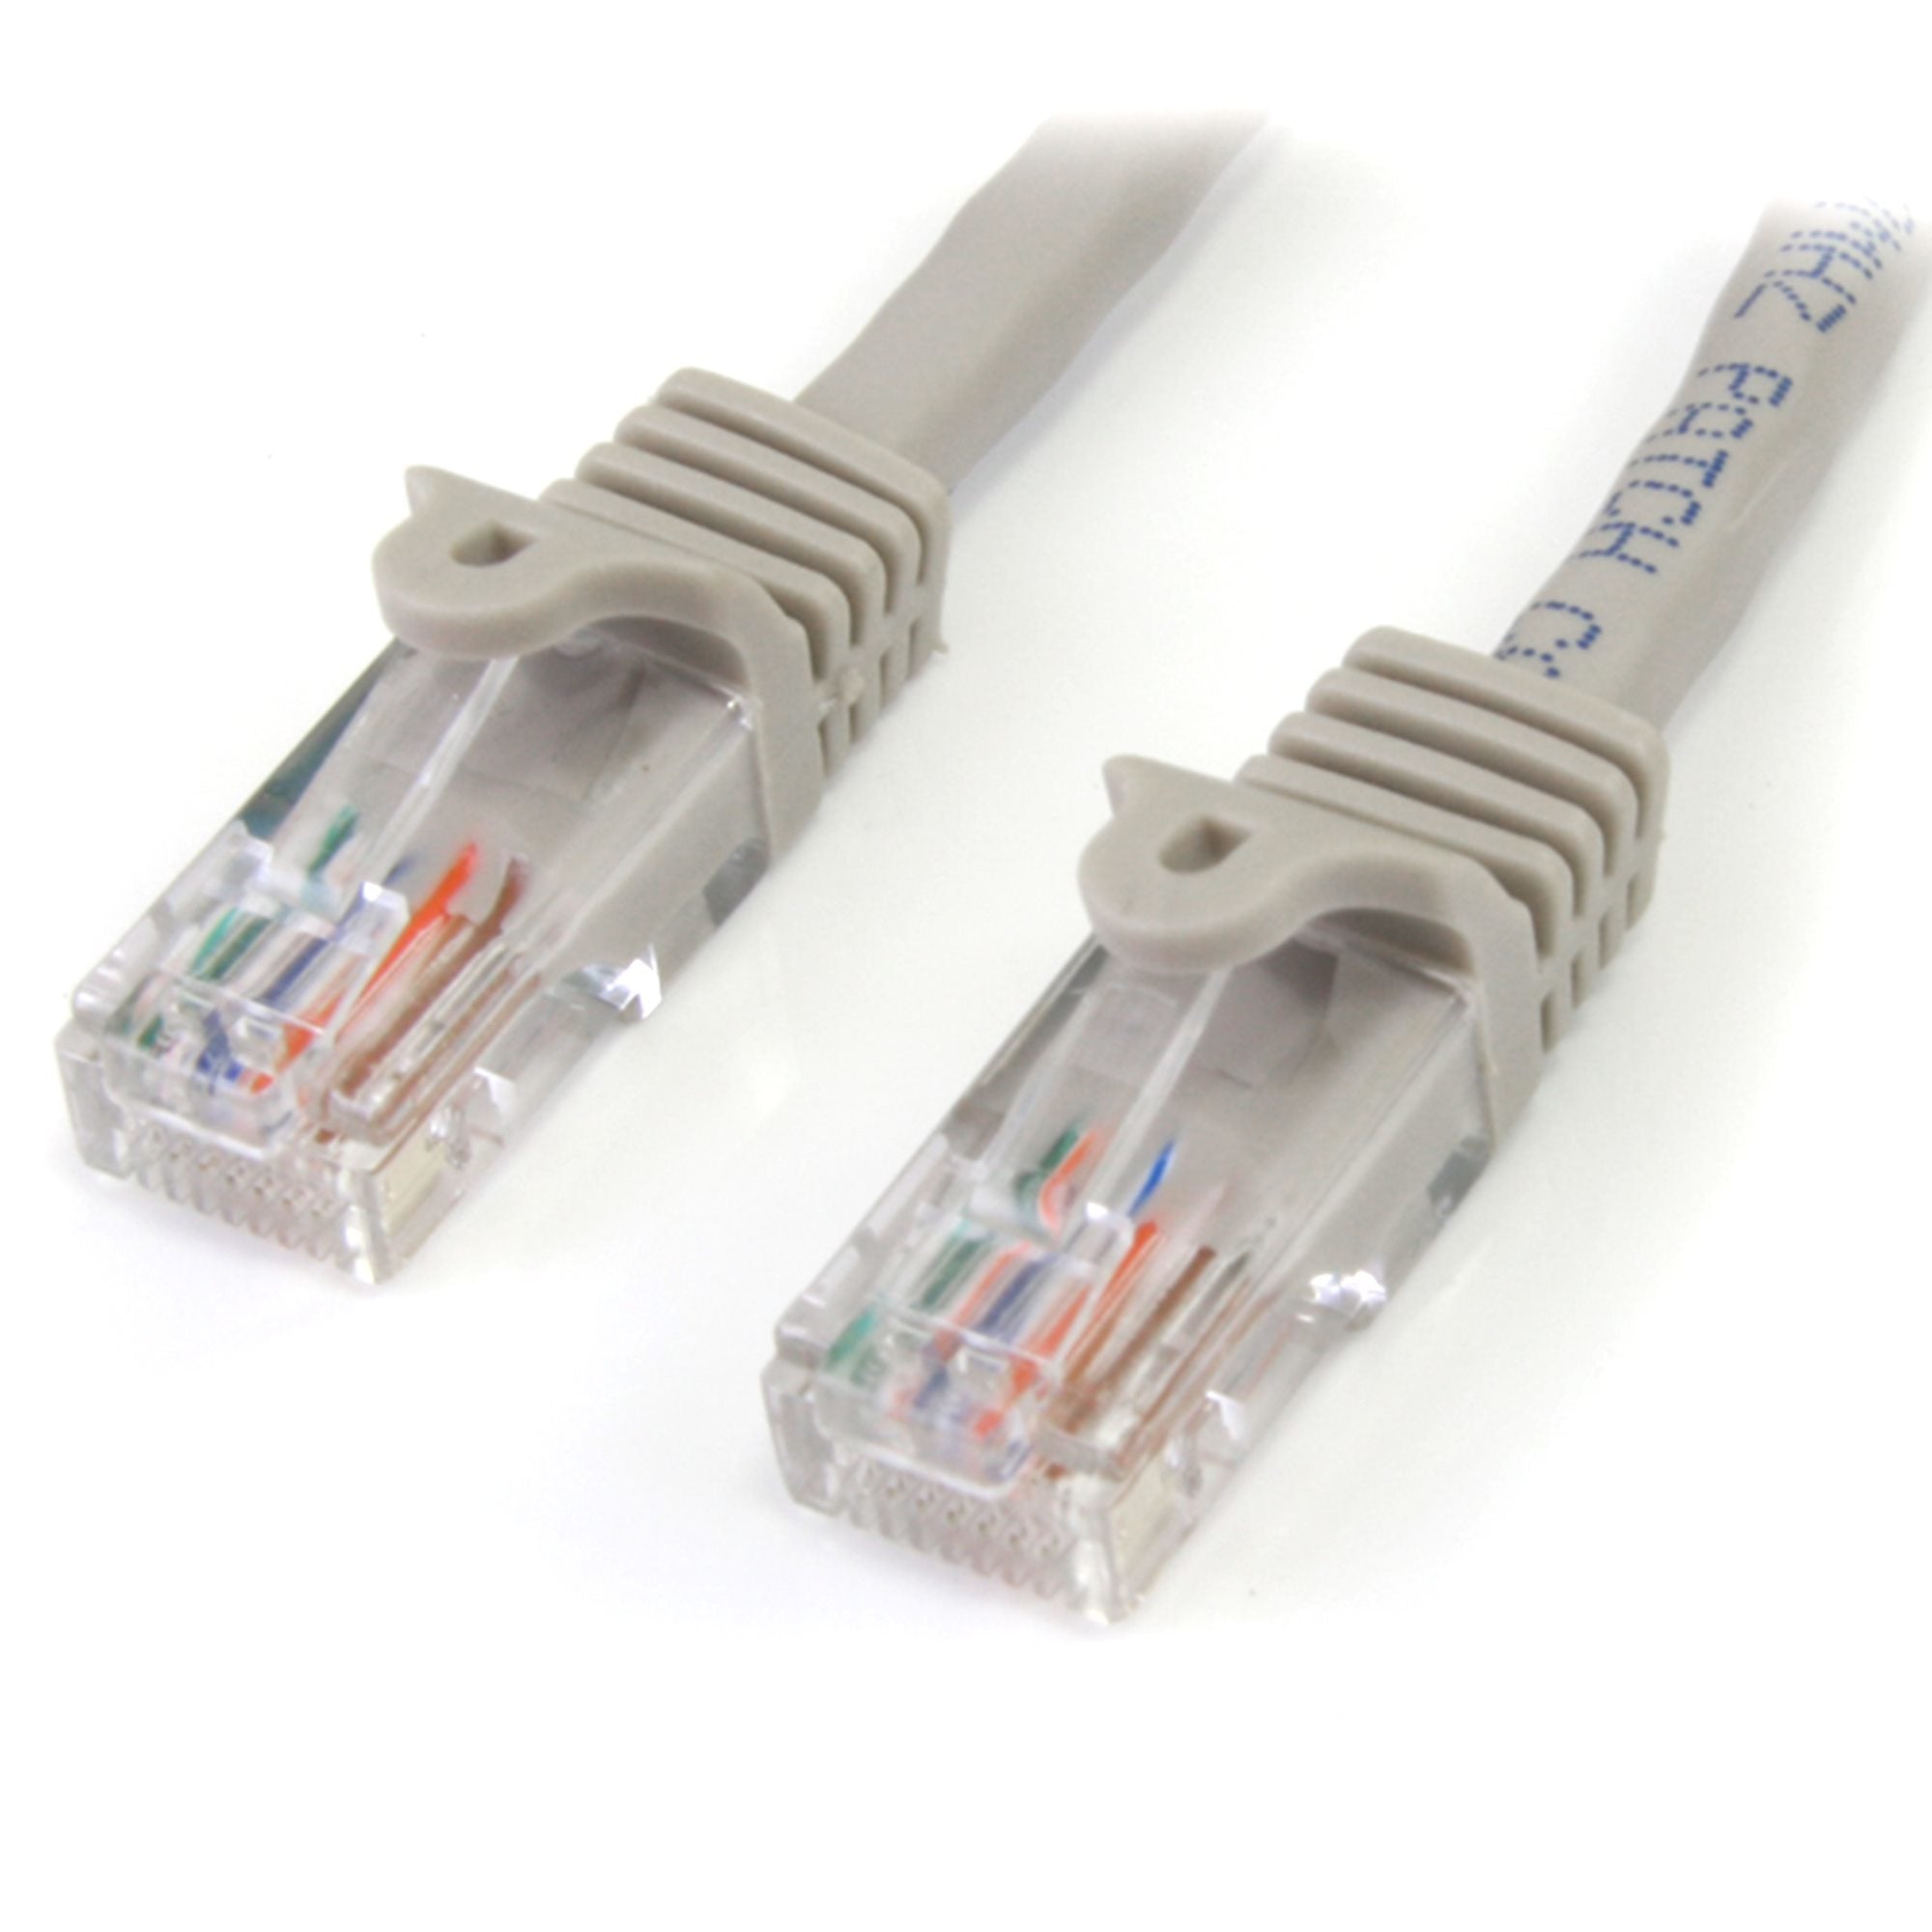 StarTech.com Cat5e Patch Cable with Snagless RJ45 Connectors - 1m, Gray